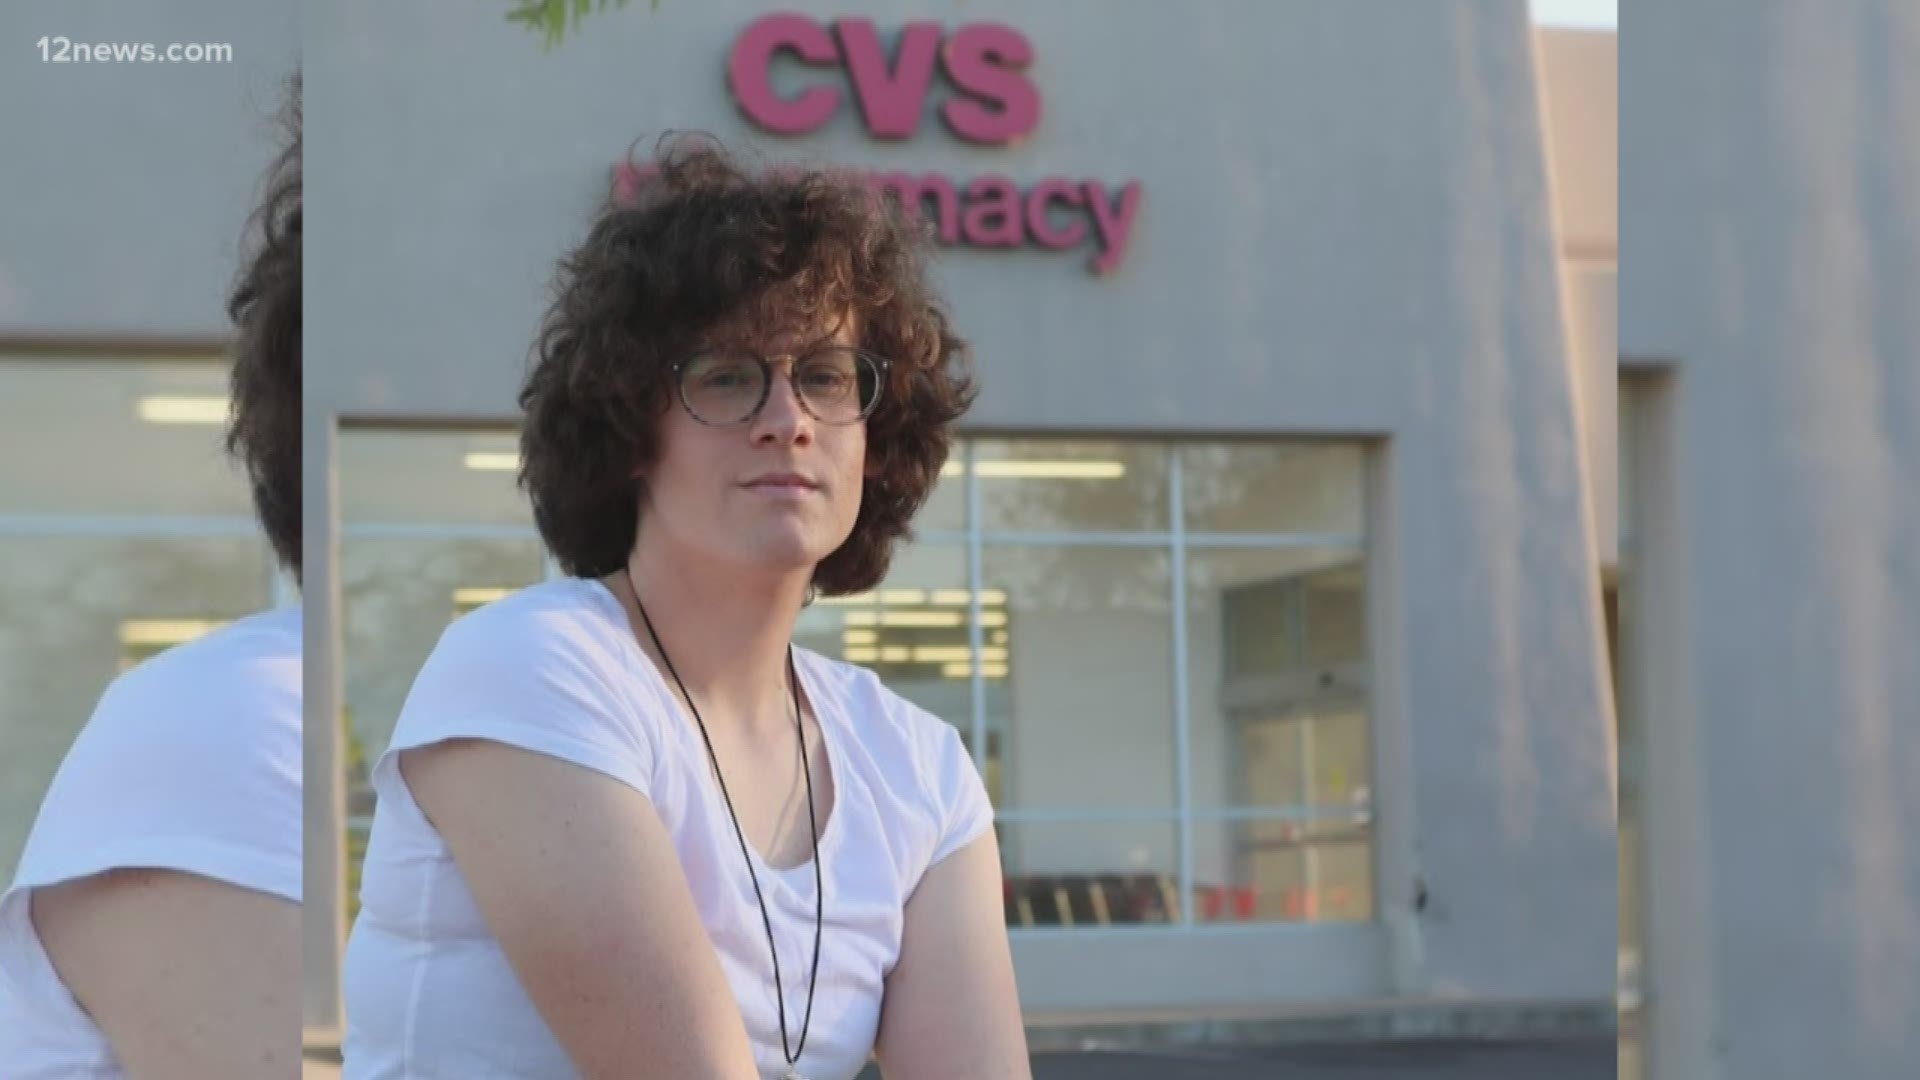 Hilde Hall was devastated after  a pharmacists at a CVS in Fountain hills refused to fill her prescription for hormone therapy.